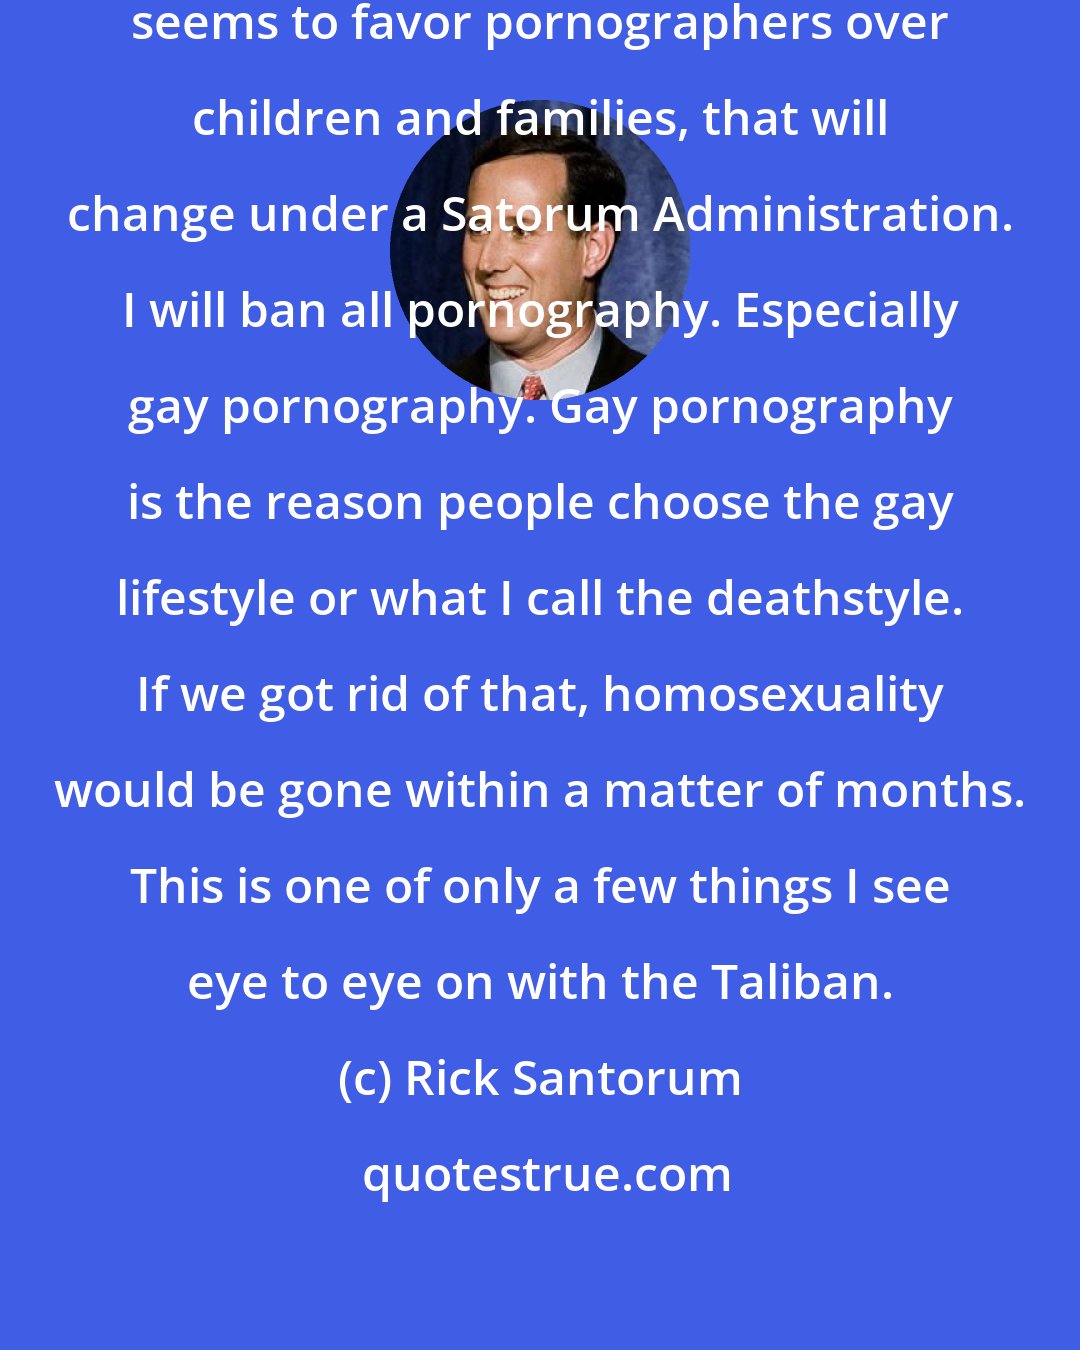 Rick Santorum: While the Obama Department of Justice seems to favor pornographers over children and families, that will change under a Satorum Administration. I will ban all pornography. Especially gay pornography. Gay pornography is the reason people choose the gay lifestyle or what I call the deathstyle. If we got rid of that, homosexuality would be gone within a matter of months. This is one of only a few things I see eye to eye on with the Taliban.